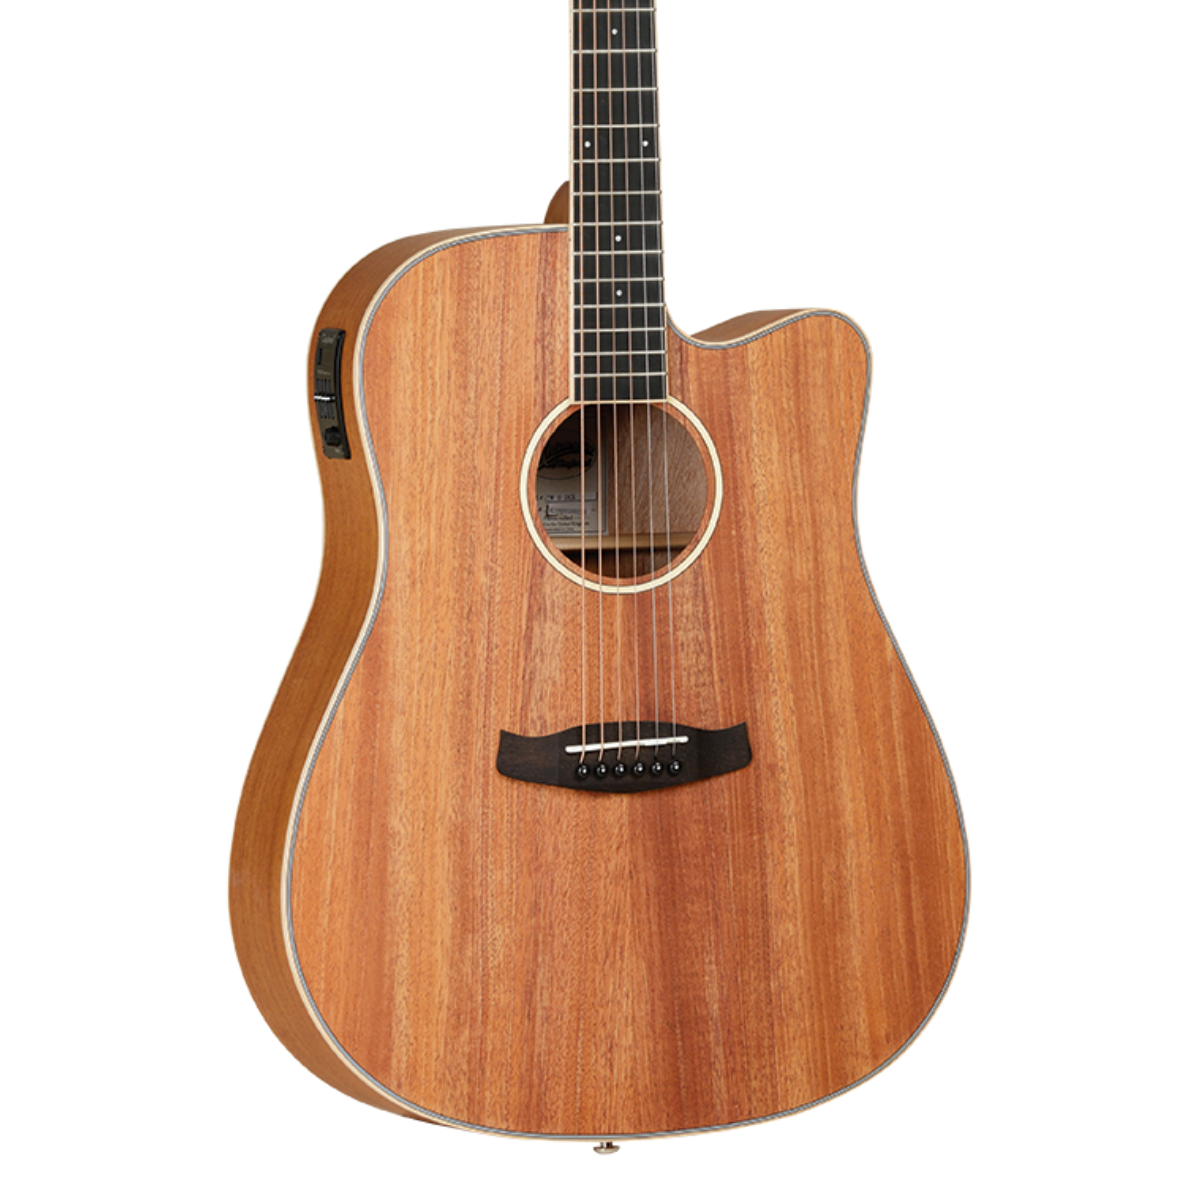 Tanglewood Union Dreadnought Acoustic Guitar